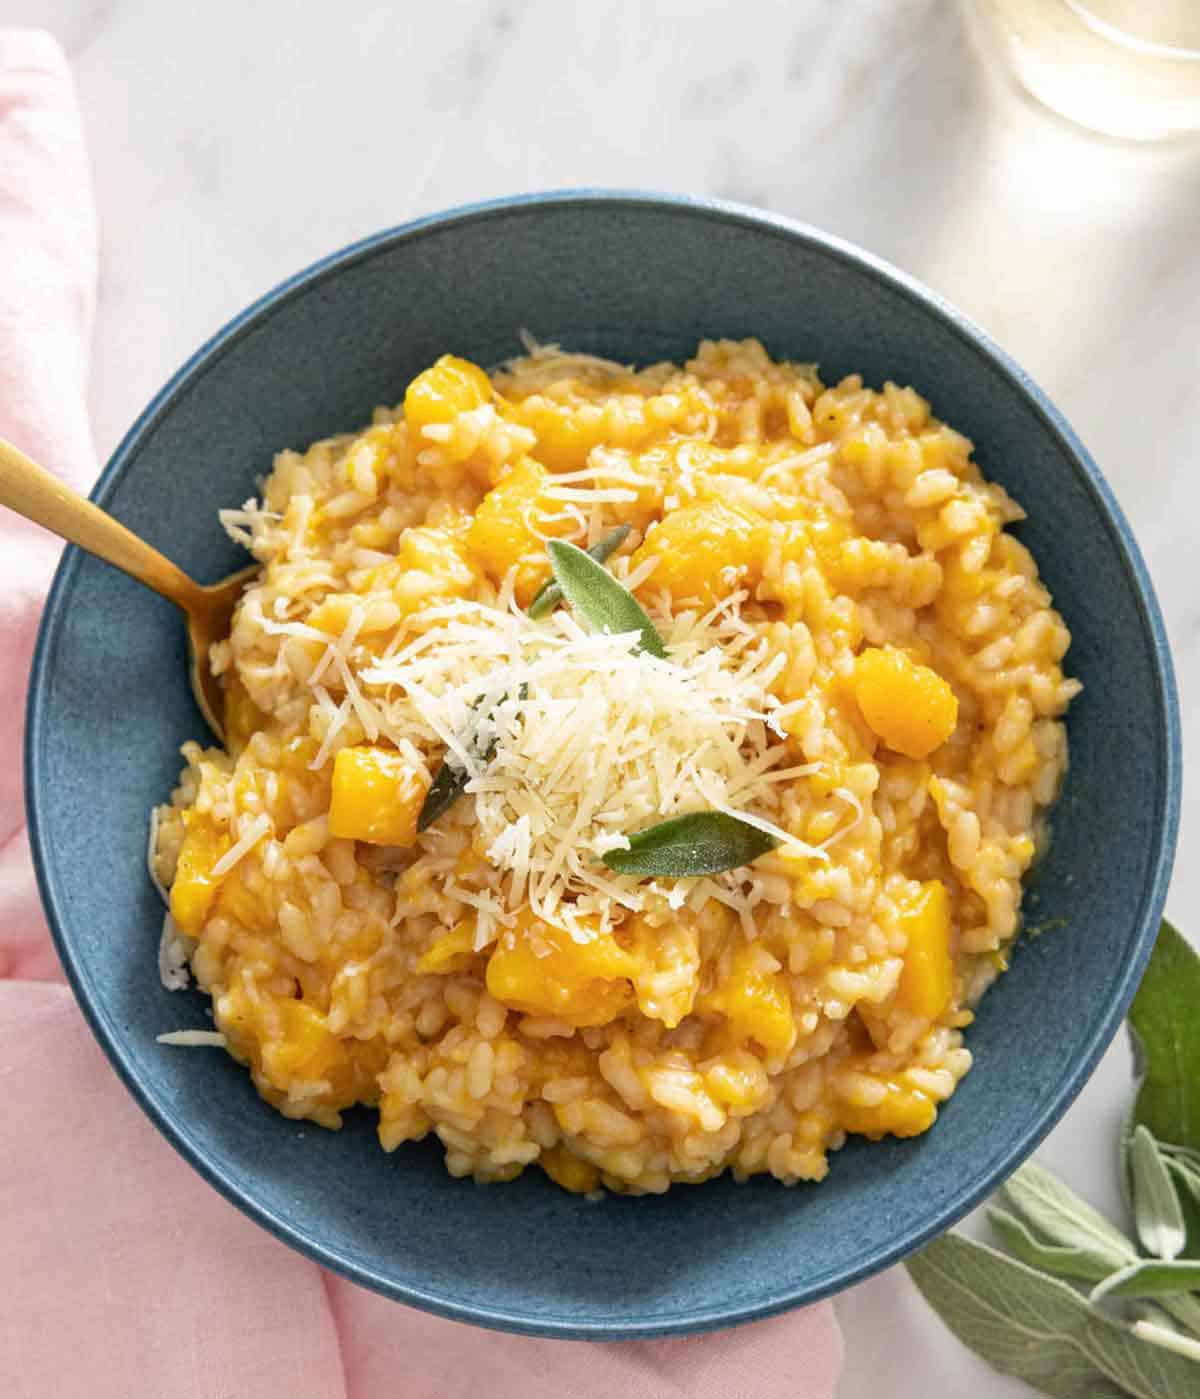 Overhead view of a bowl of butternut squash risotto with cheese on top.